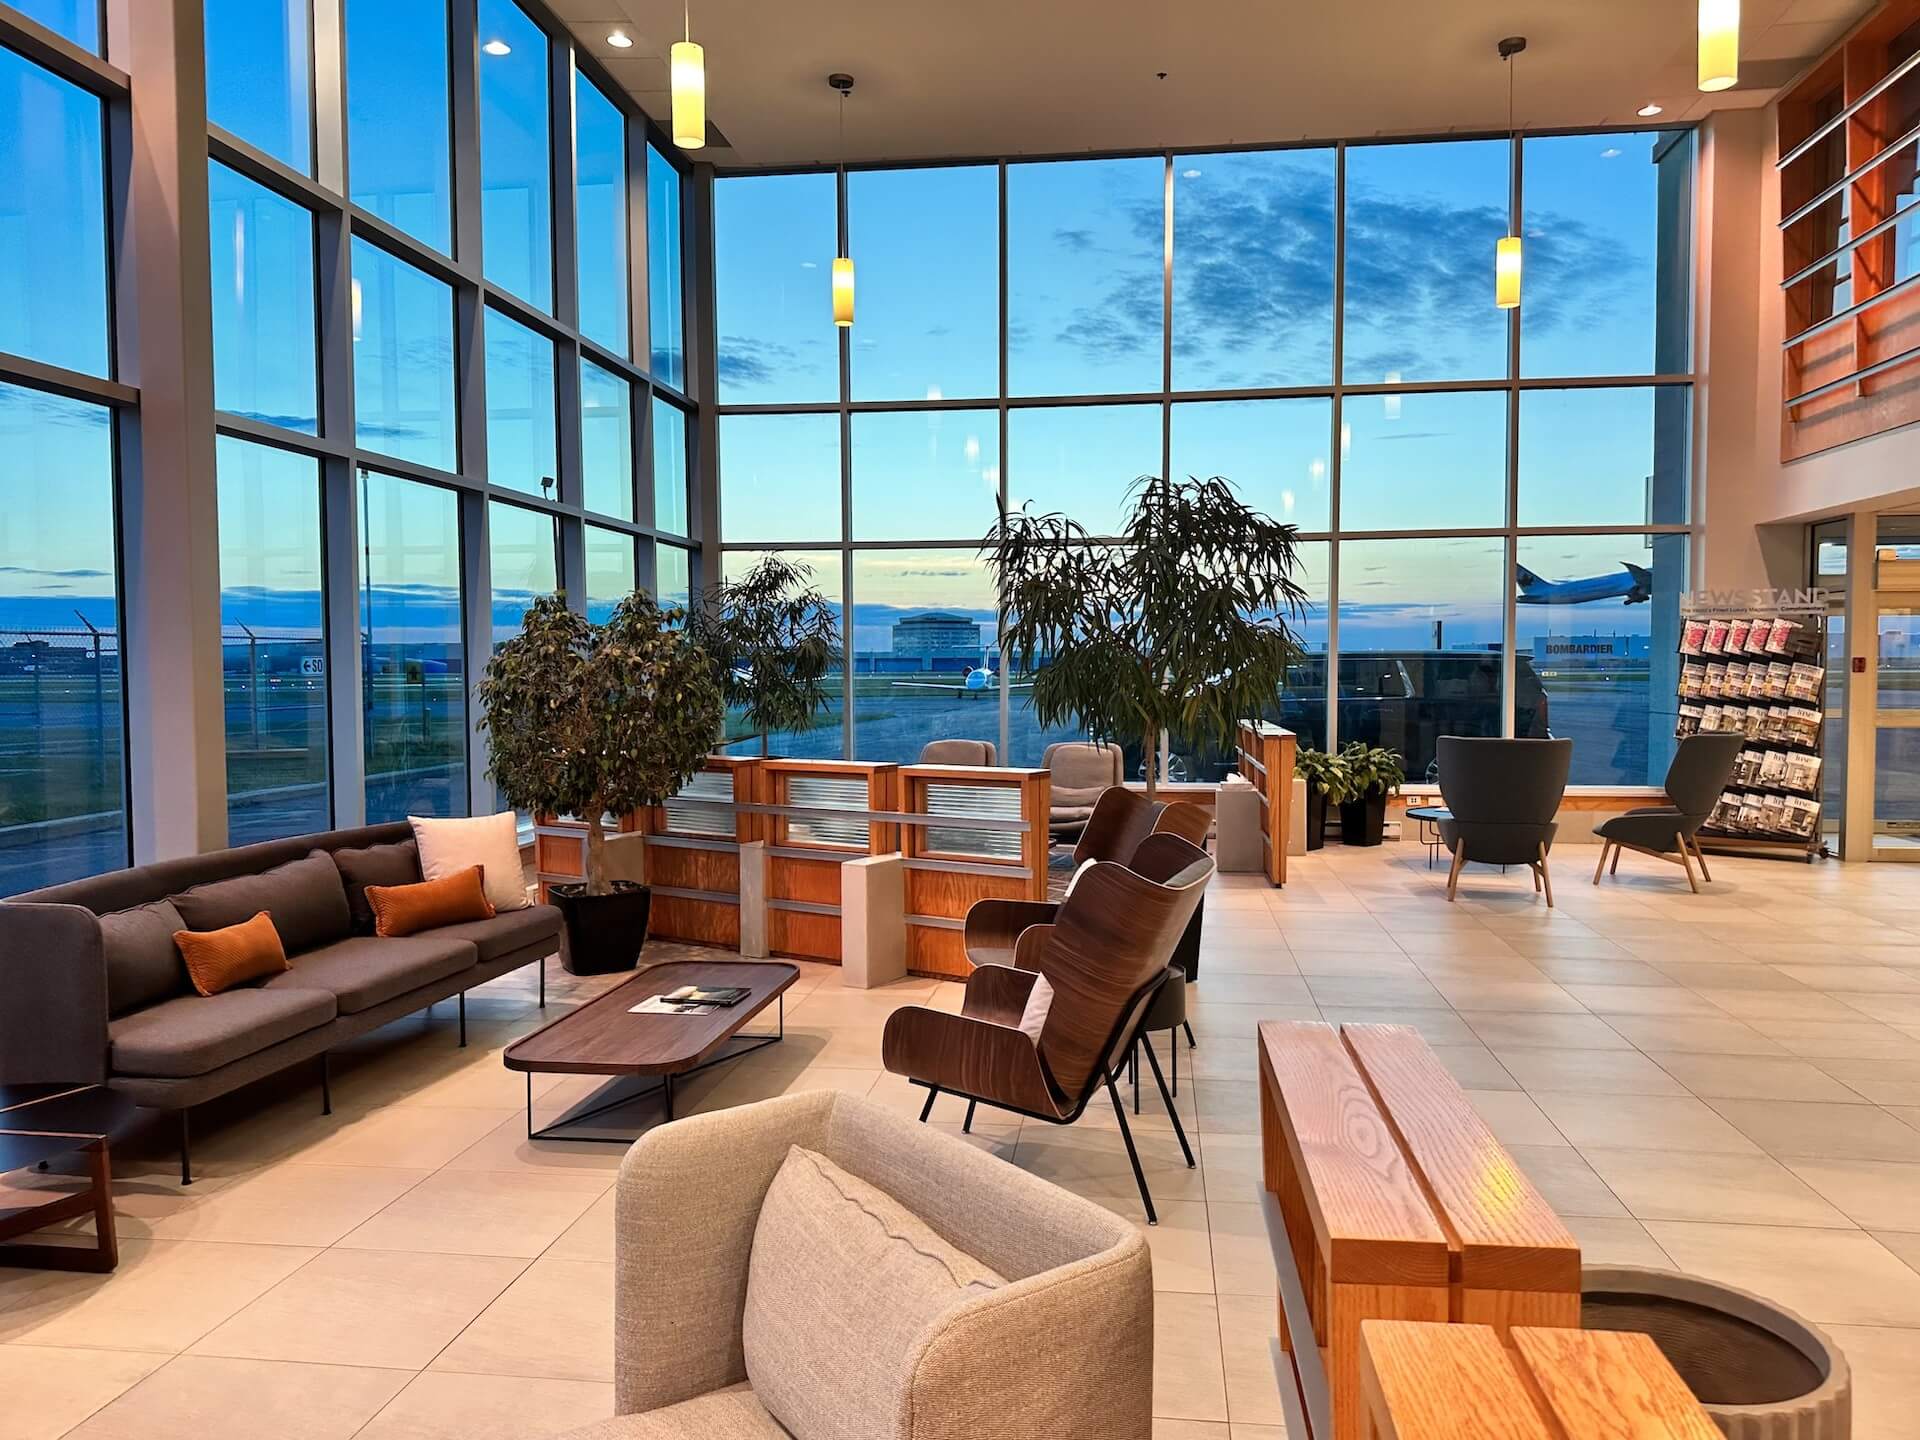 Lounge area at the Skyservice Montréal airport